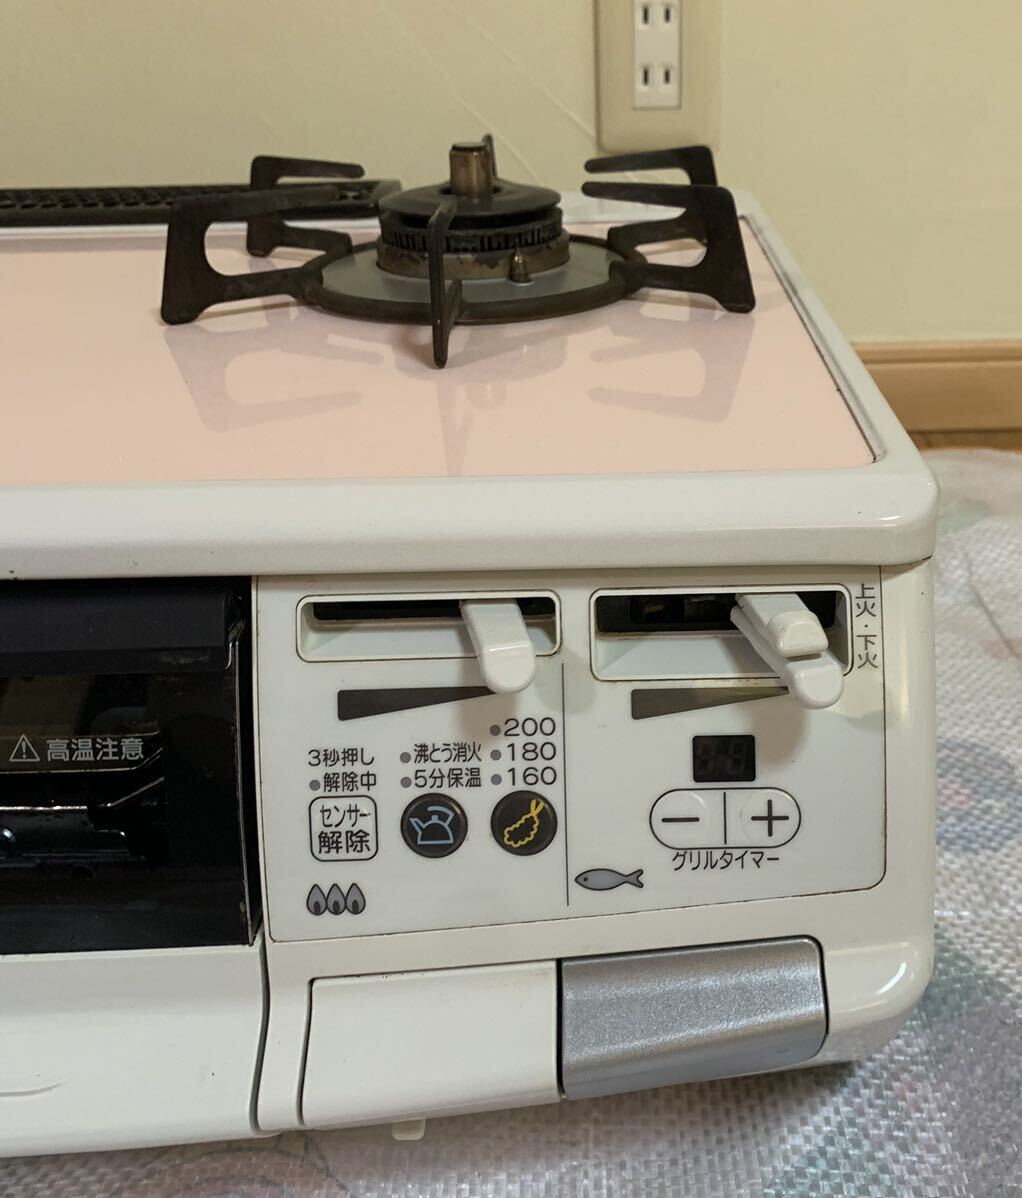  used gas portable cooking stove LP gas Rinnai made is oS660VCTS-R